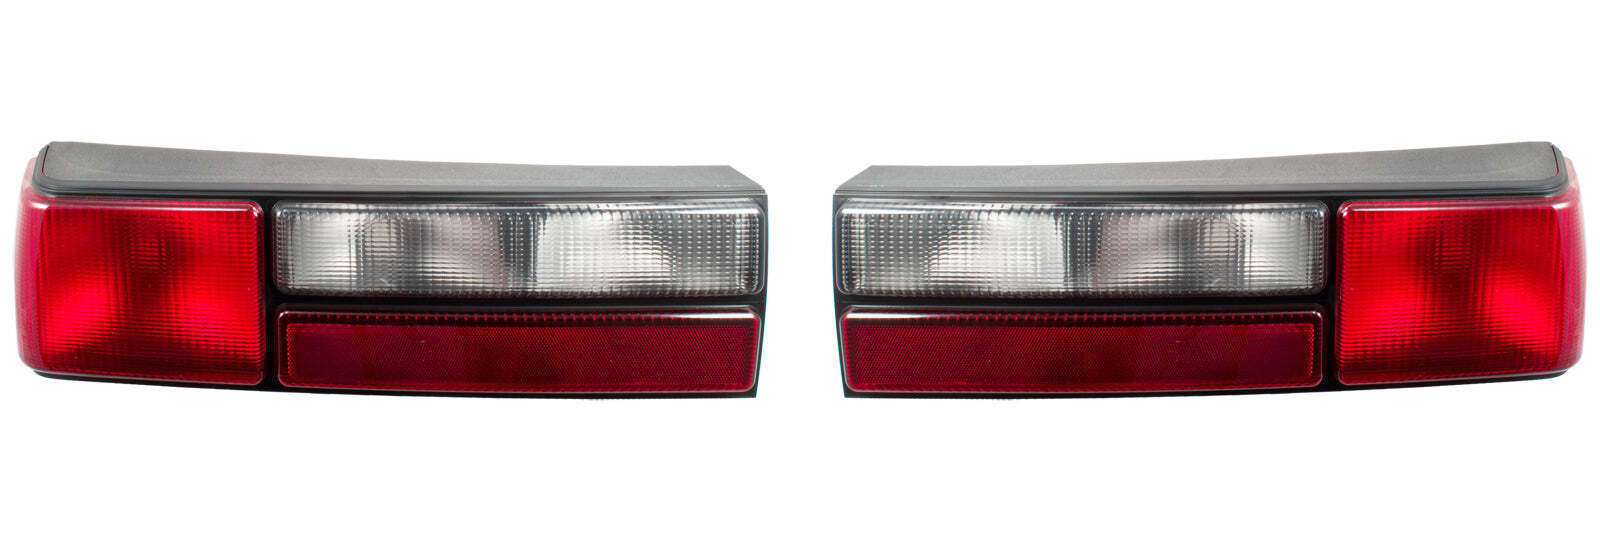 1983-1993 Mustang LX & GT Complete Taillights w/ Housings, Pair